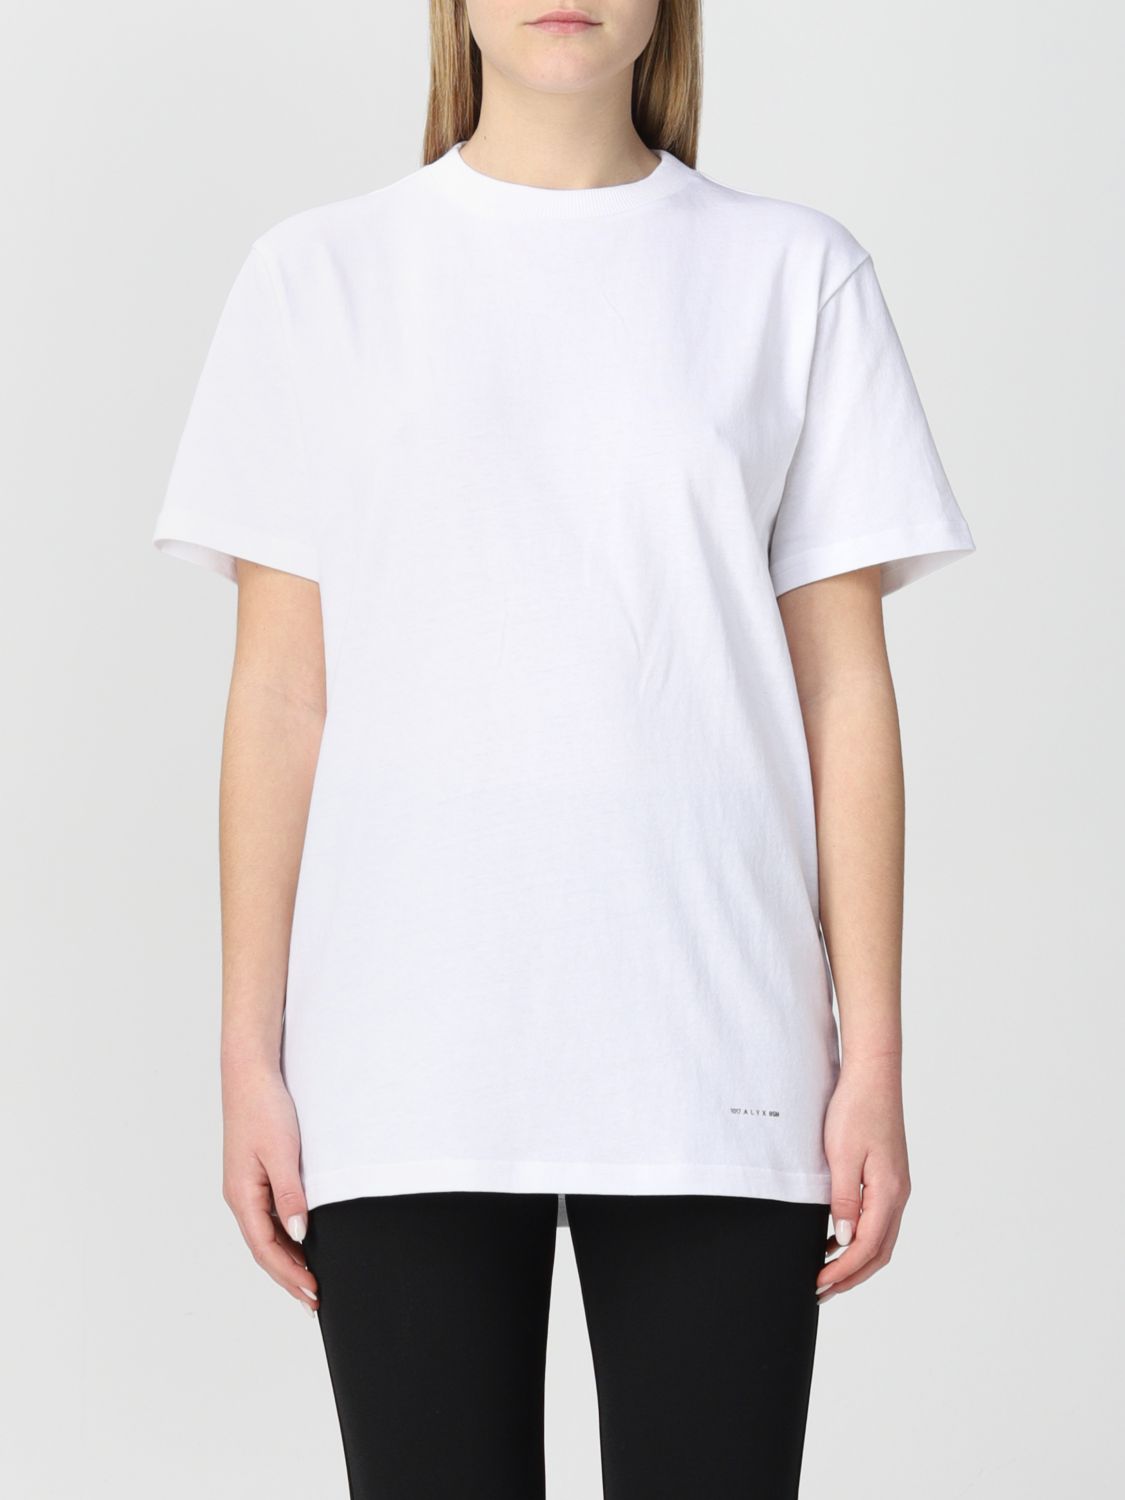 ALYX: Set of 3 t-shirts in cotton jersey - White | Alyx t-shirt ...